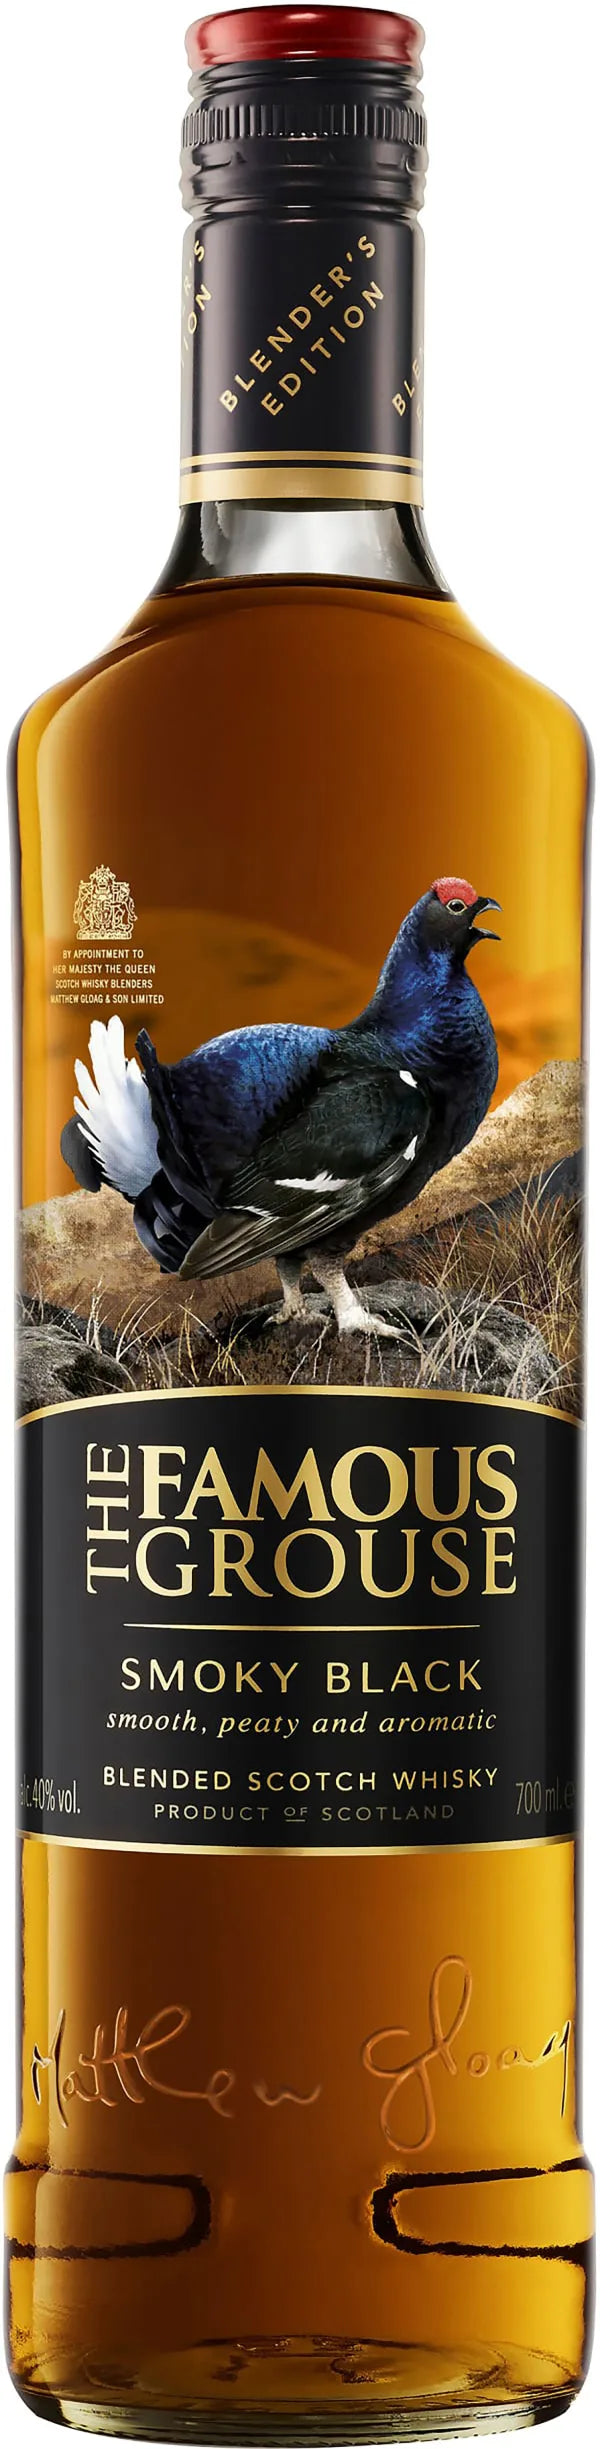 The Famous Grouse Smoky Black.jpeg__PID:2a4fadef-140c-46e6-be15-f6a1975d2806